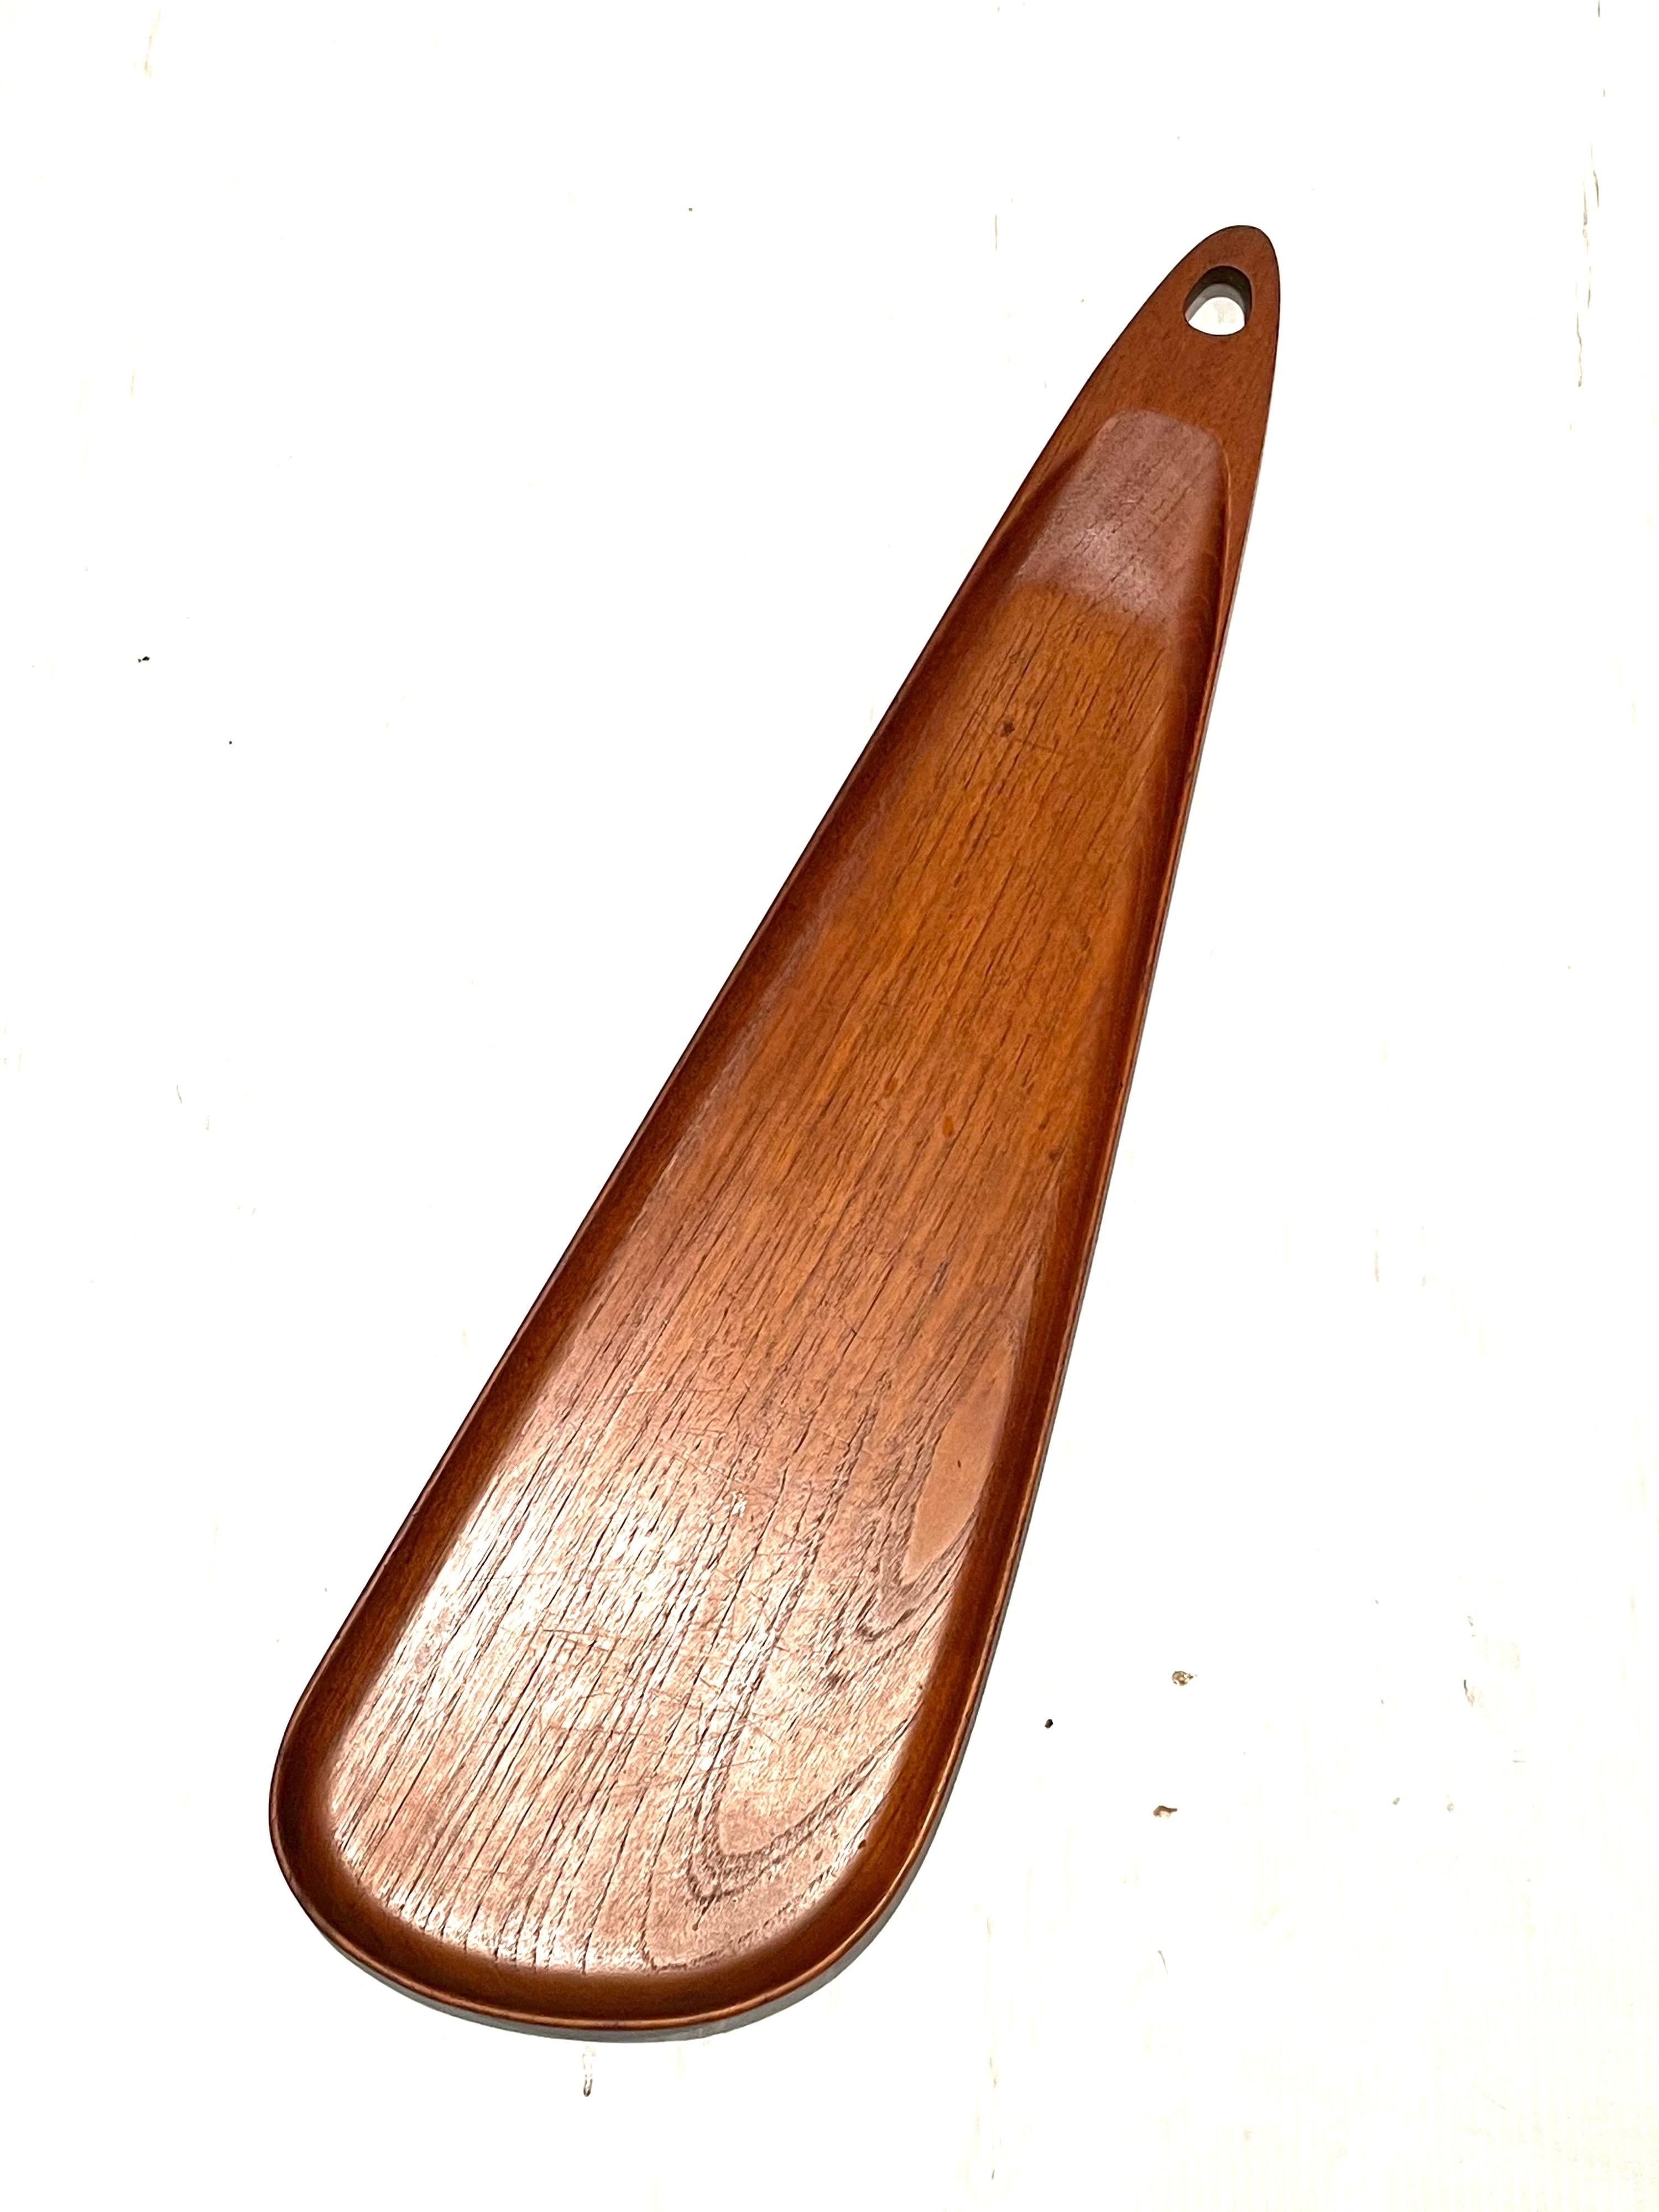 Beautiful rare 1950's solid teak freeform tray, with raised edge and hanging hole stamped at the bottom by Digsmed made in Denmark.